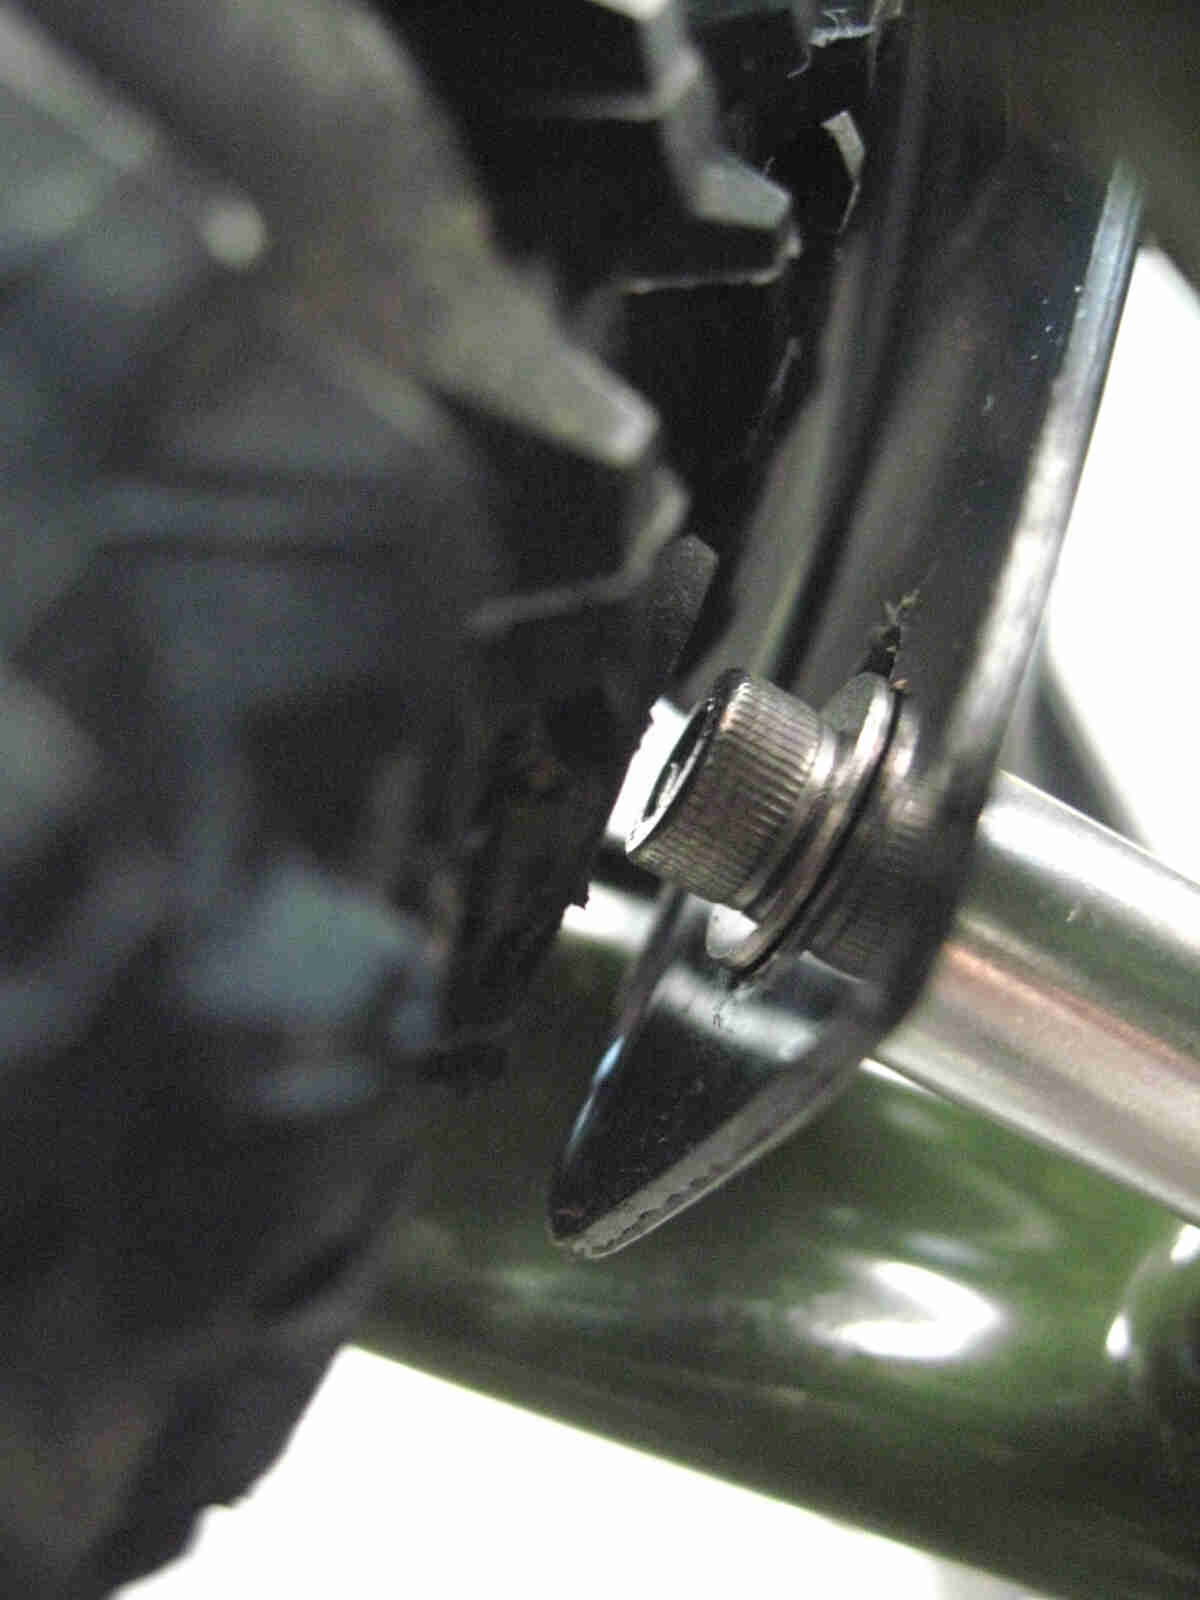 Surly Ogre bike - green - rear fender mounting bolt detail - close up view